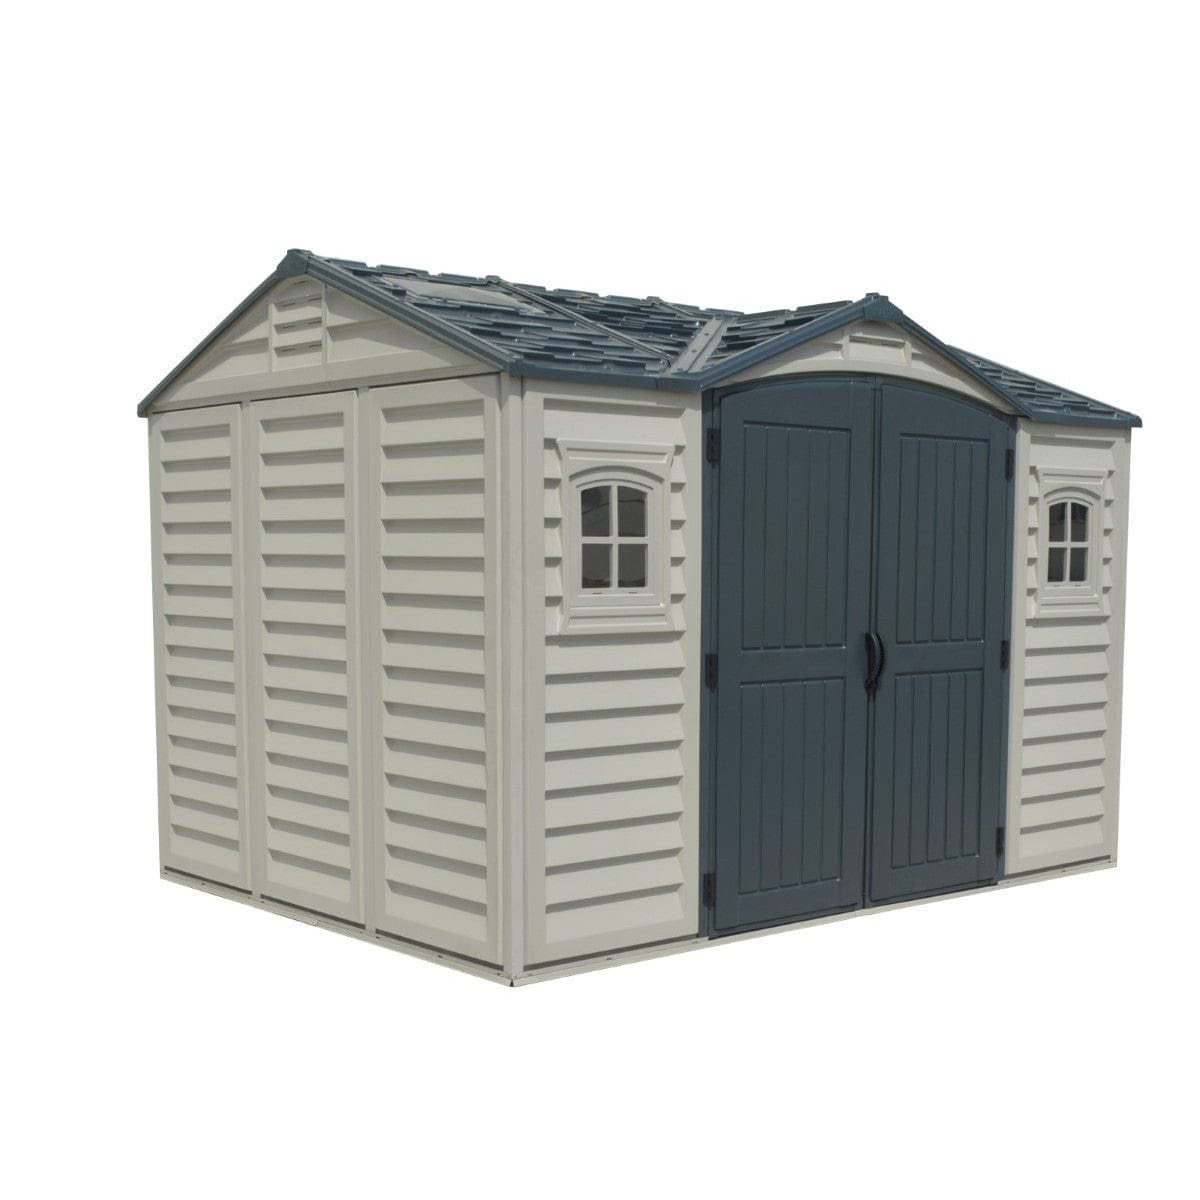 Duramax Vinyl Storage Shed Kit with Foundation DuraMax | Vinyl Storage Shed Apex Pro 10.5' x 8' x 6' with Foundation, 2 Windows & a Sidedoor | Eastern States 40116_NJ